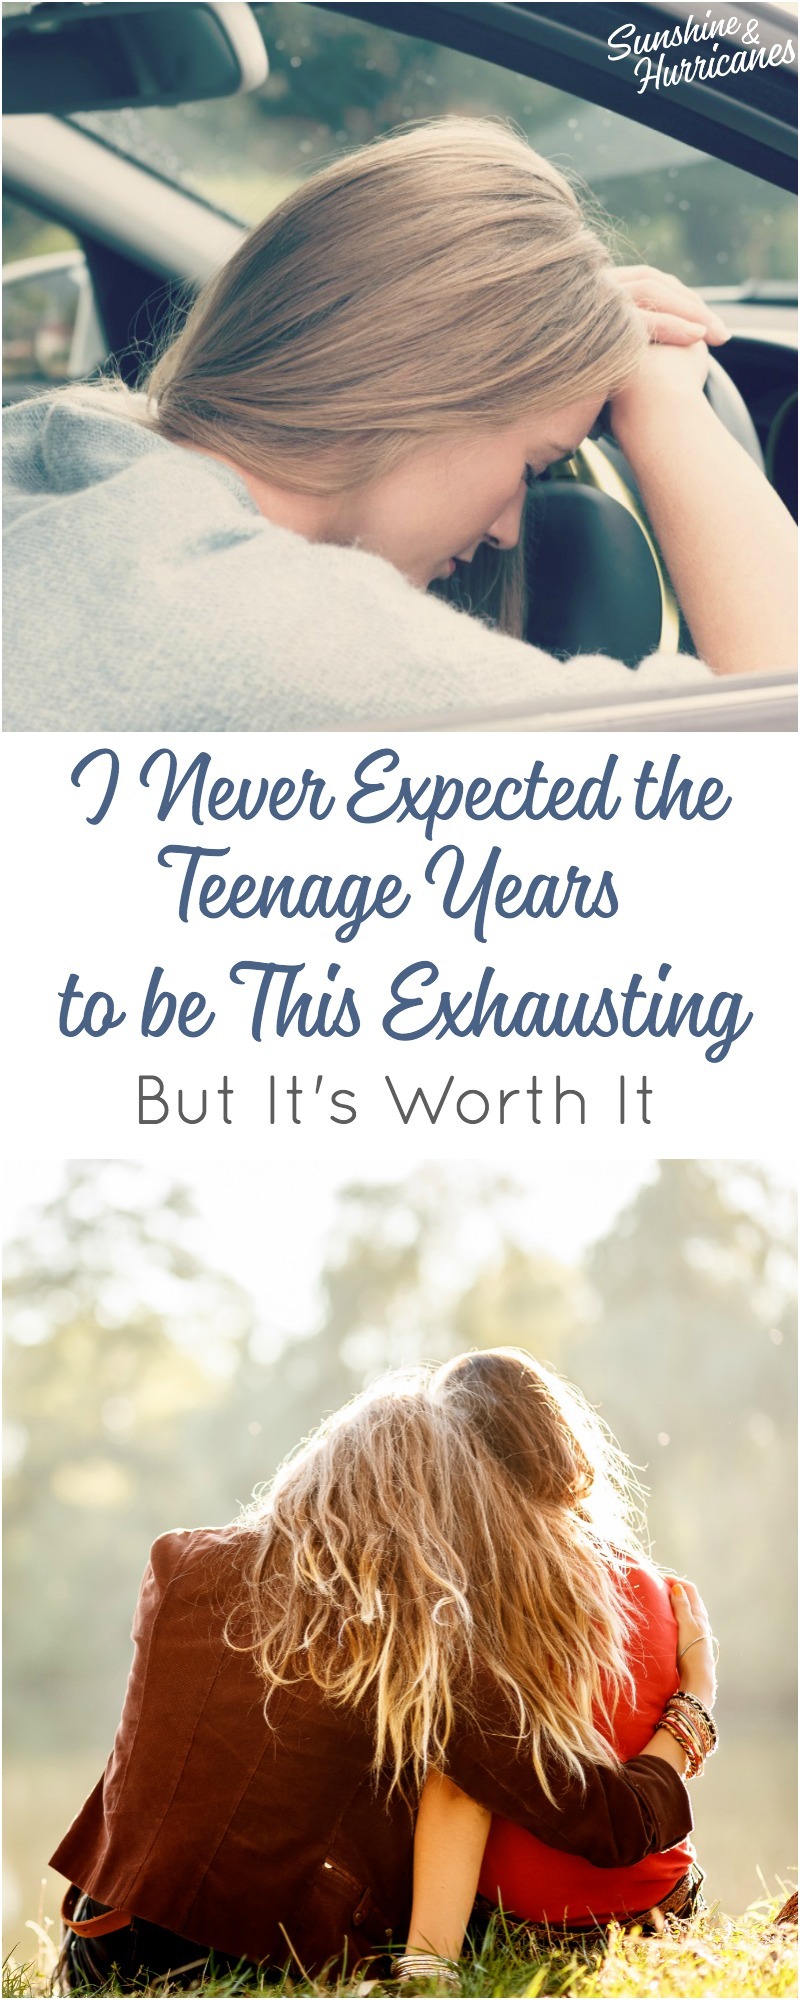 The teenage years can be a roller coaster. You've never felt so exhausted. But the ride is worth it. 